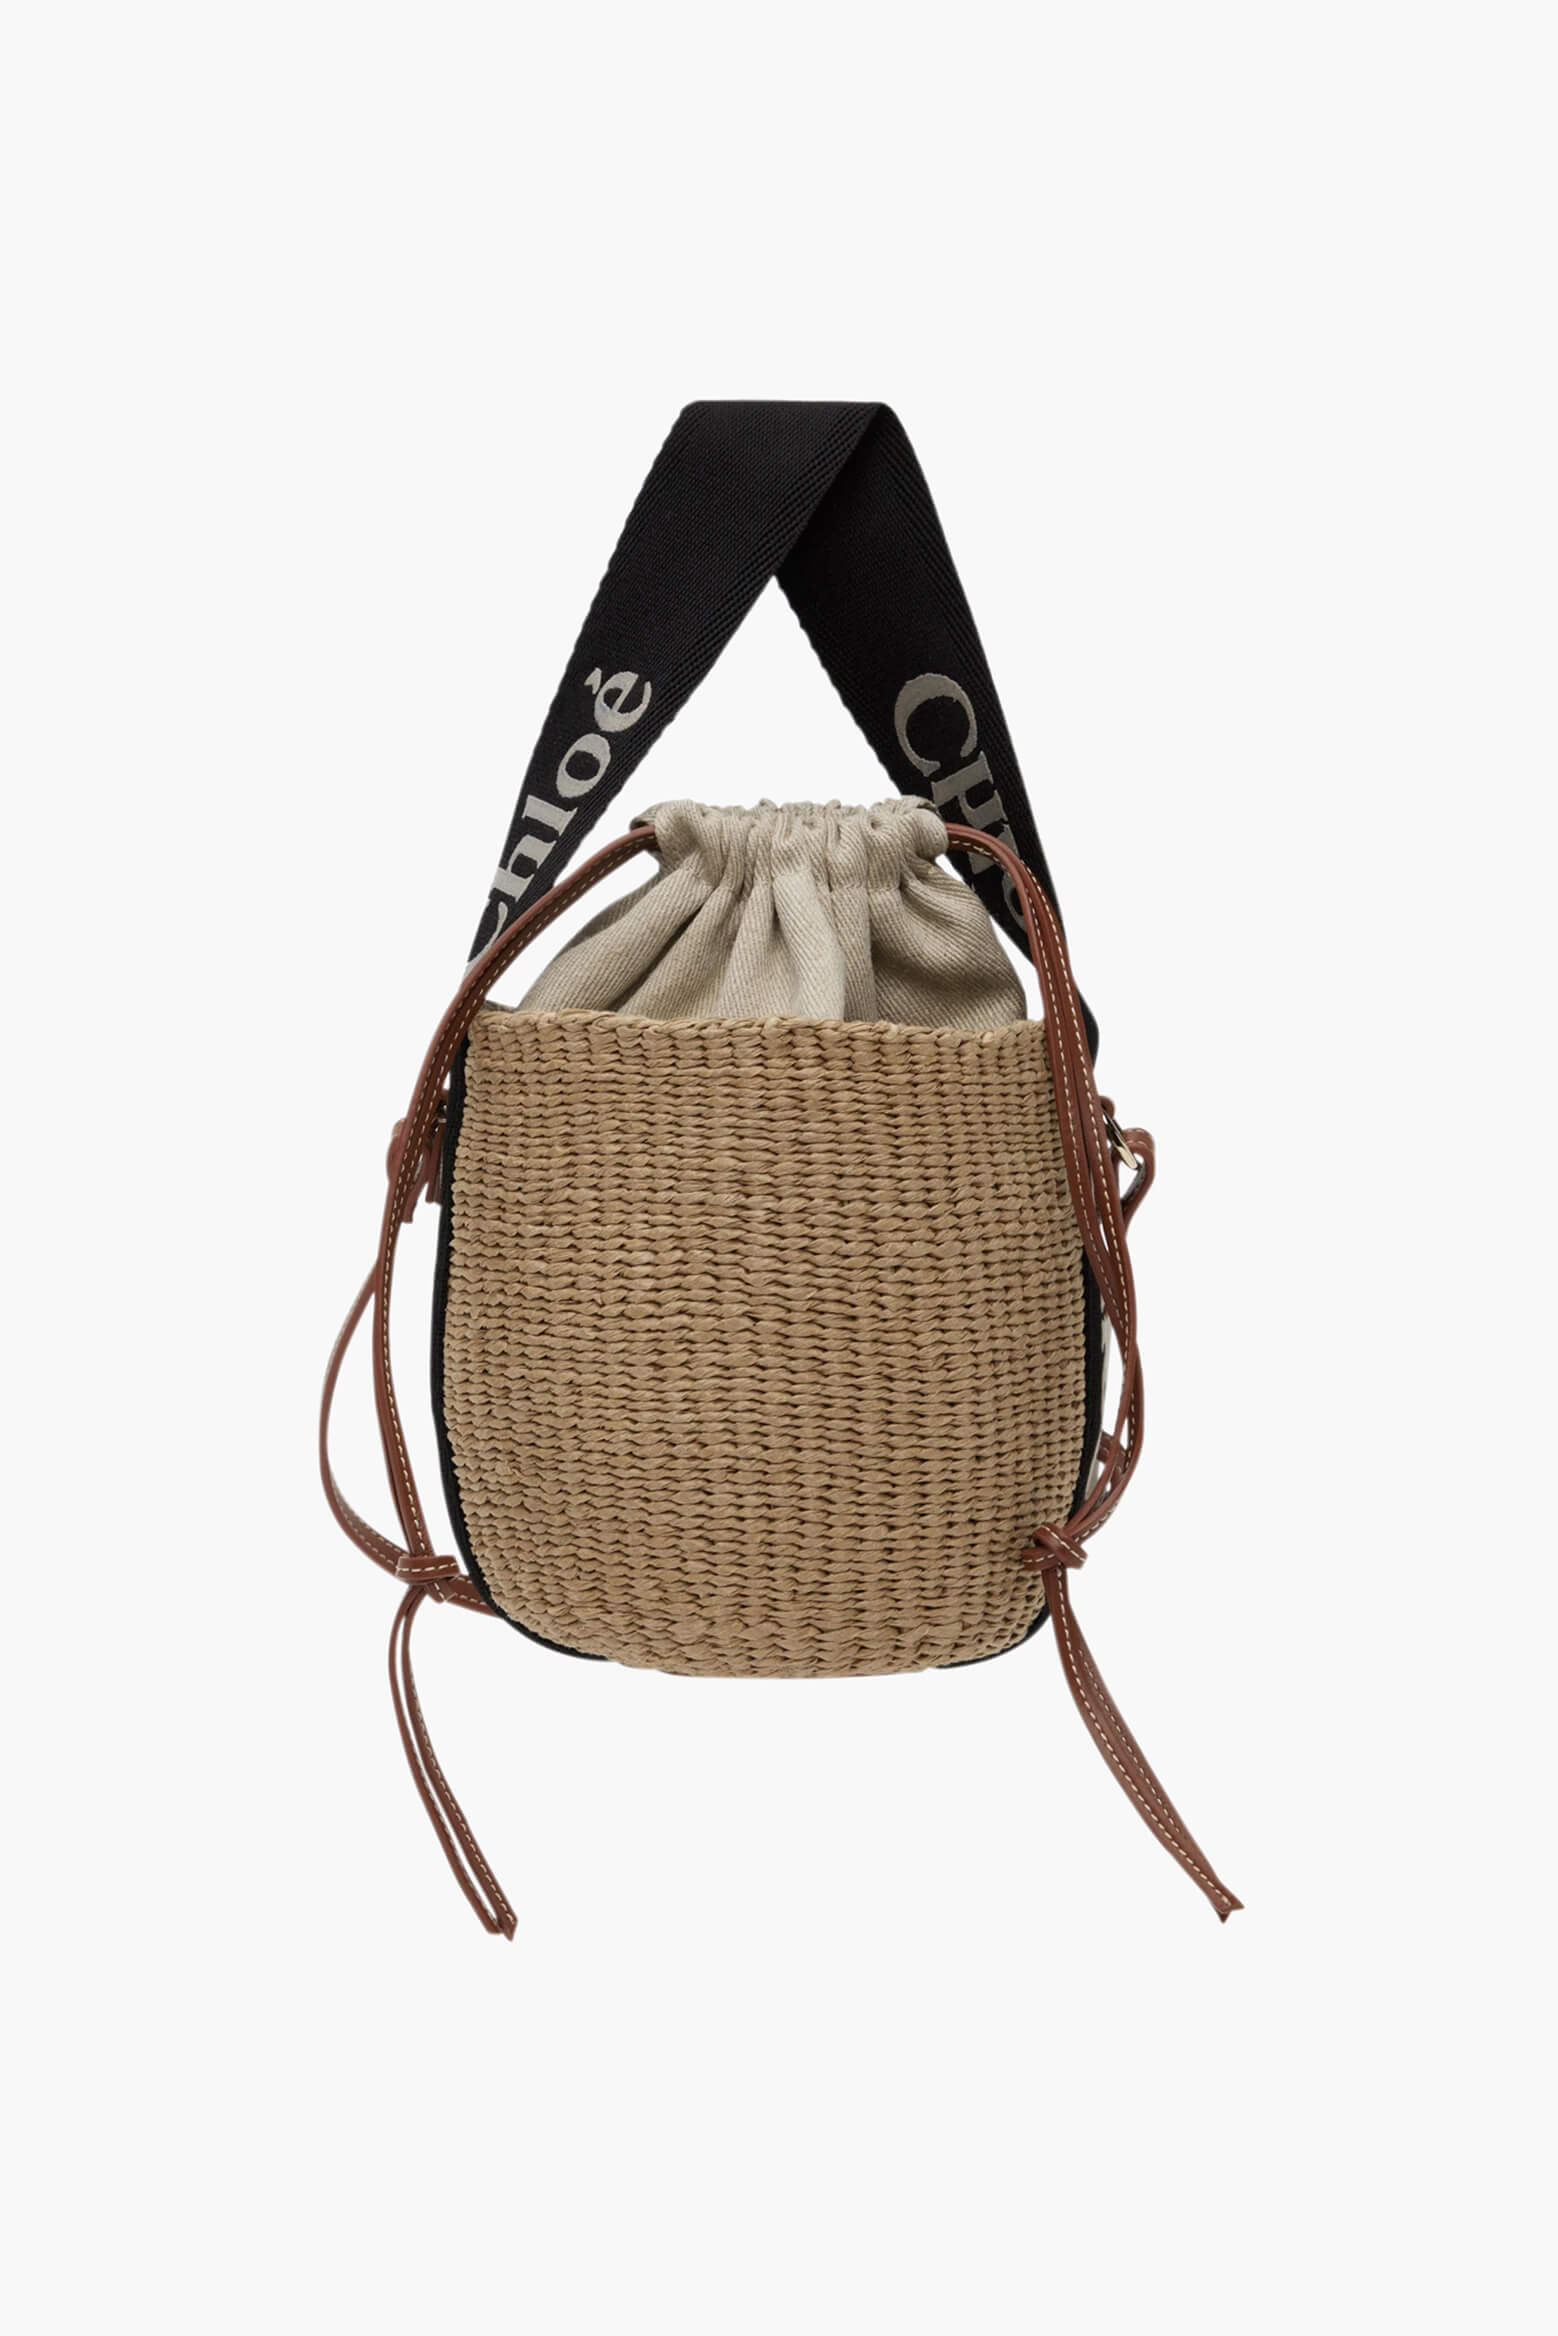 Chloé Woody Small Basket in Black available at TNT The New Trend Australia.